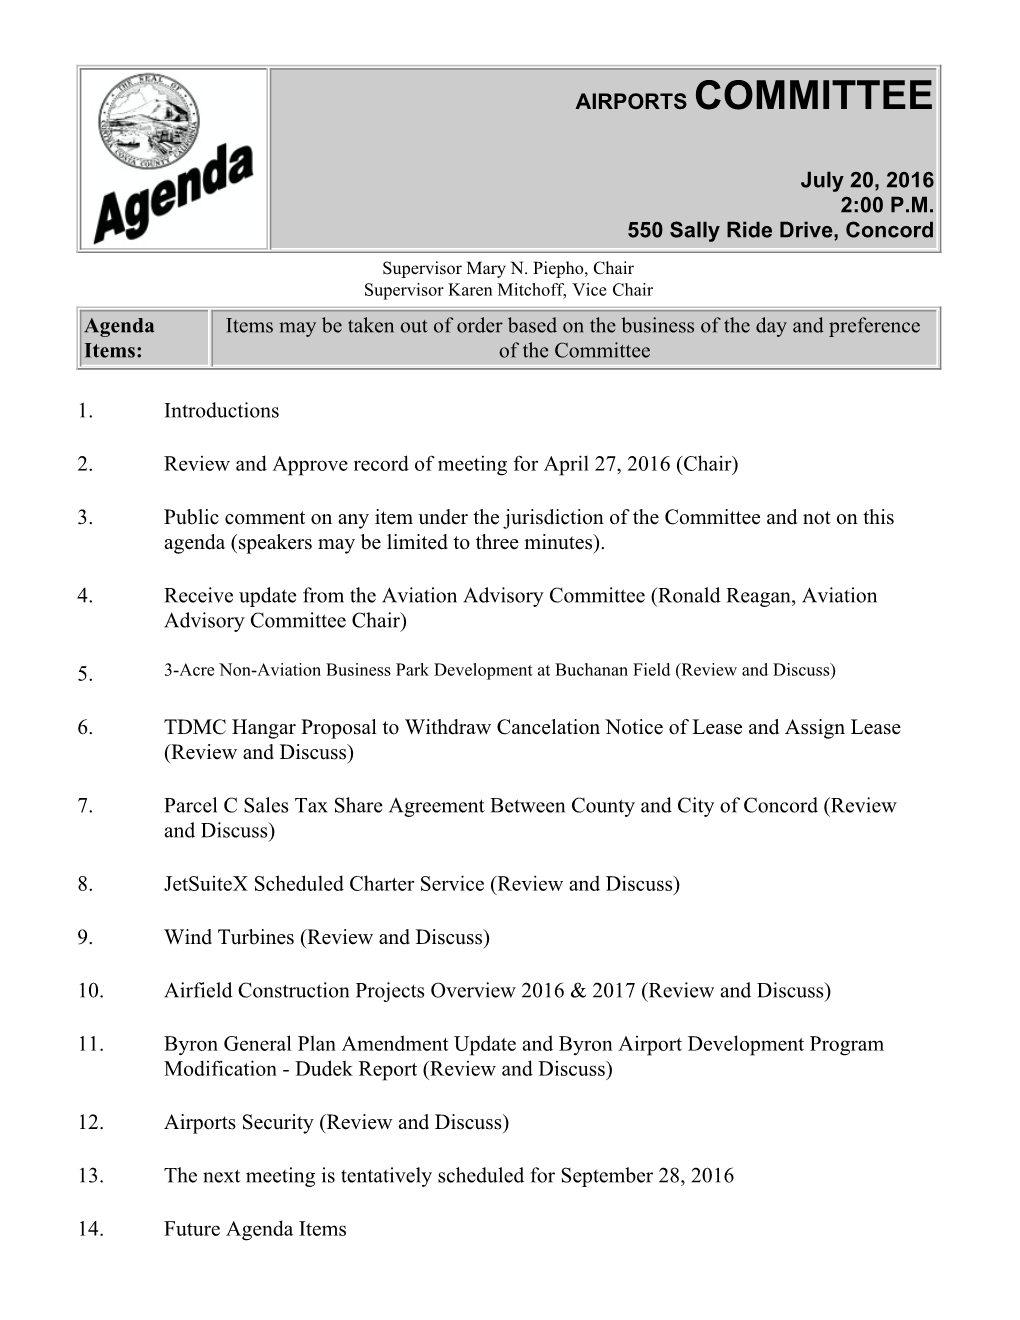 AIRPORTS COMMITTEE July 20, 2016 2:00 PM 550 Sally Ride Drive, Concord Agenda Items